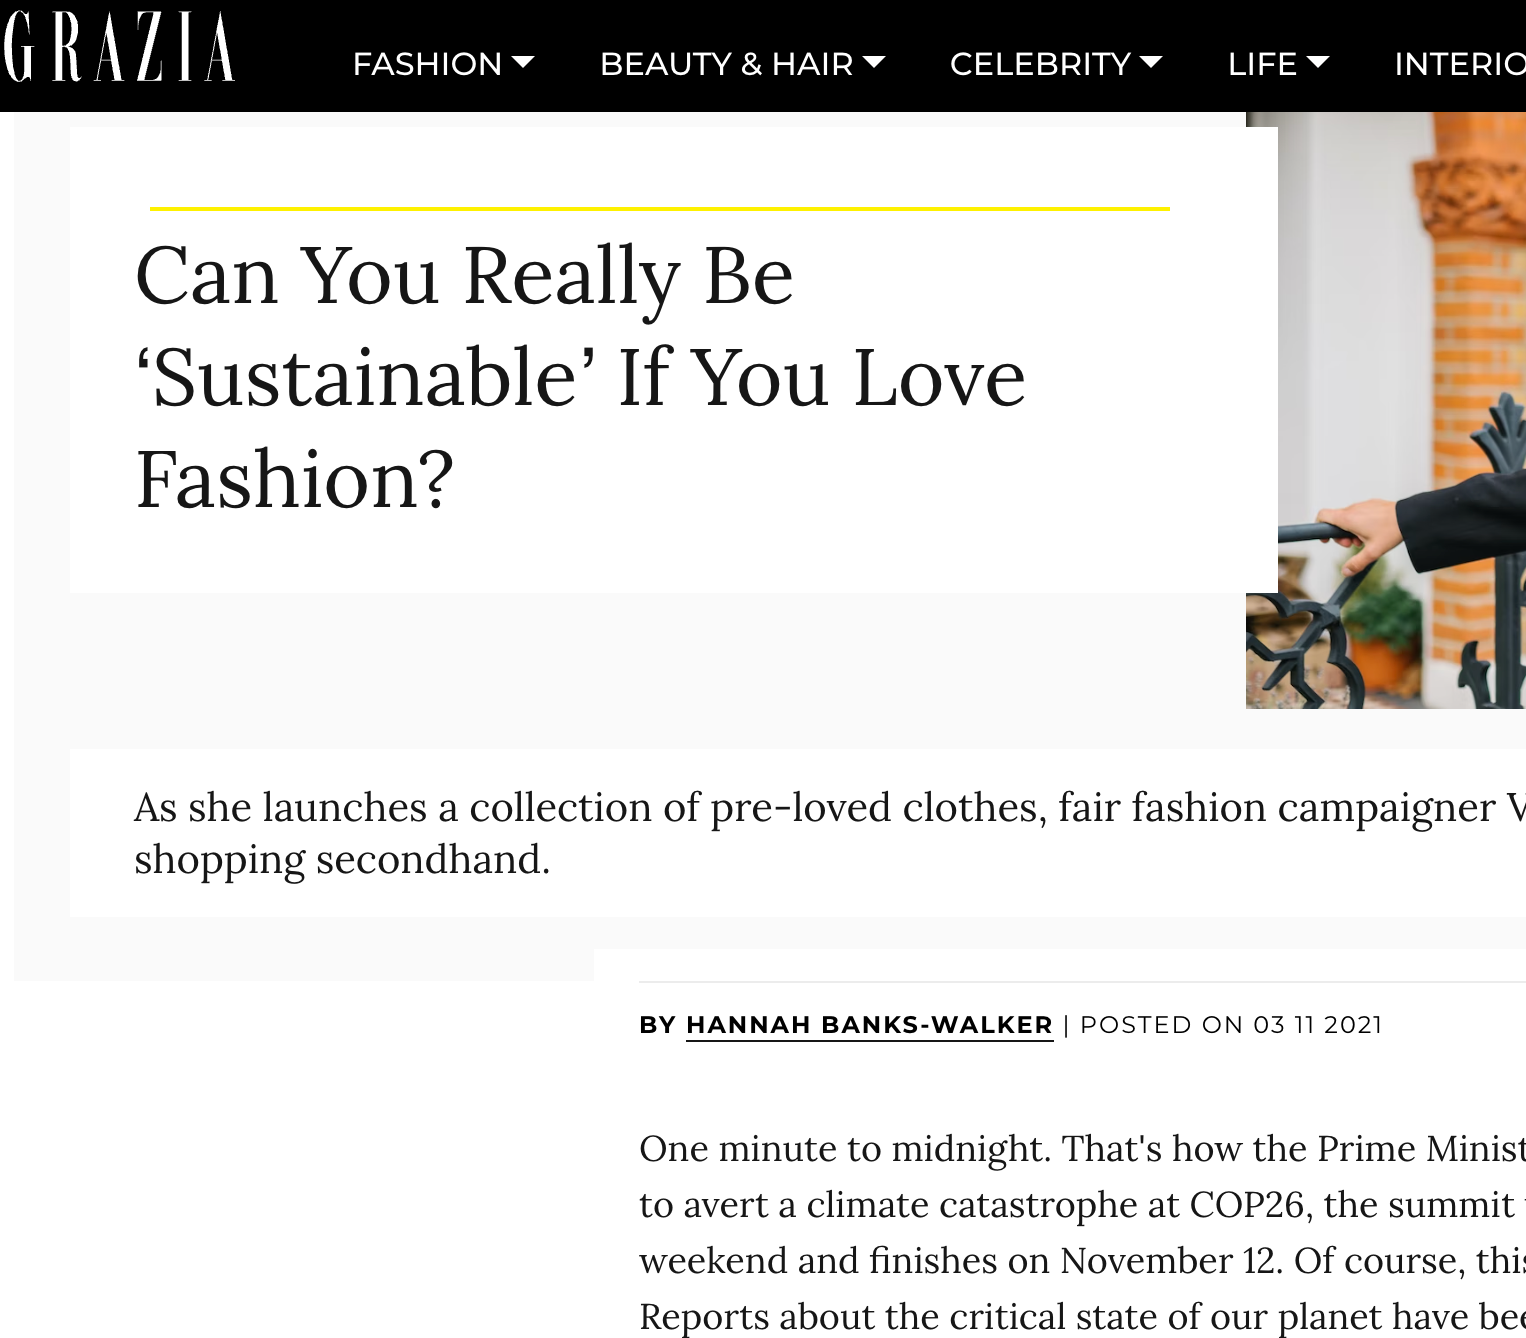 Can You Really Be ‘Sustainable’ If You Love Fashion?